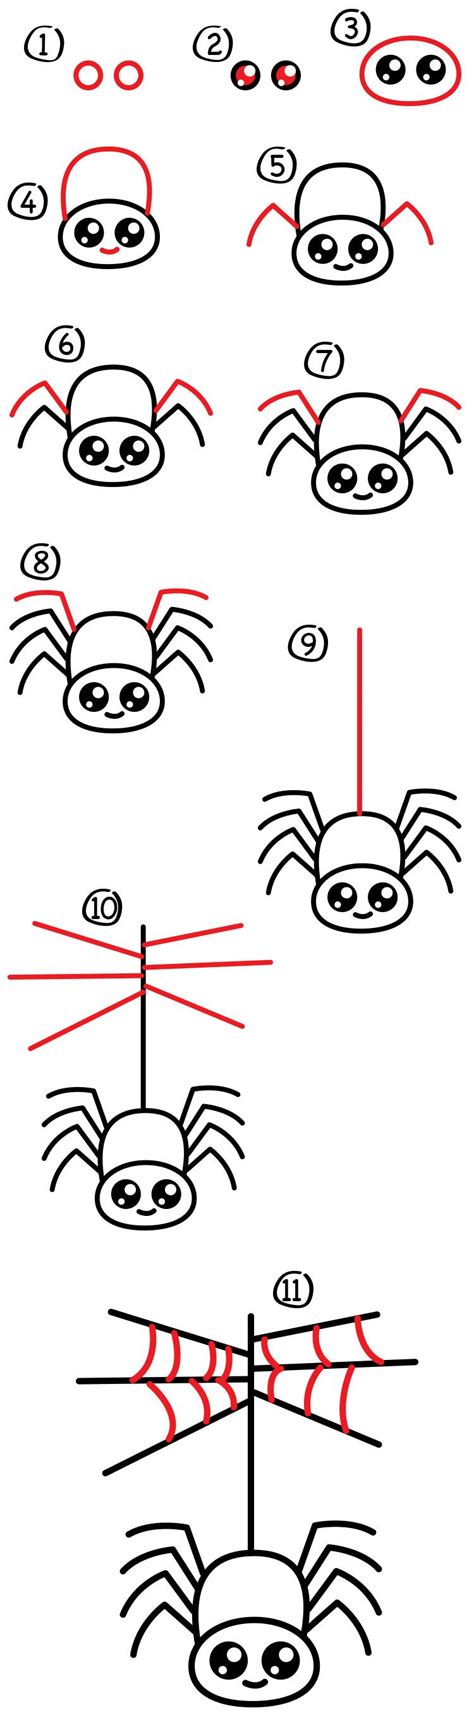 How To Draw A Cartoon Spider Art For Kids Hub Art For Kids Hub